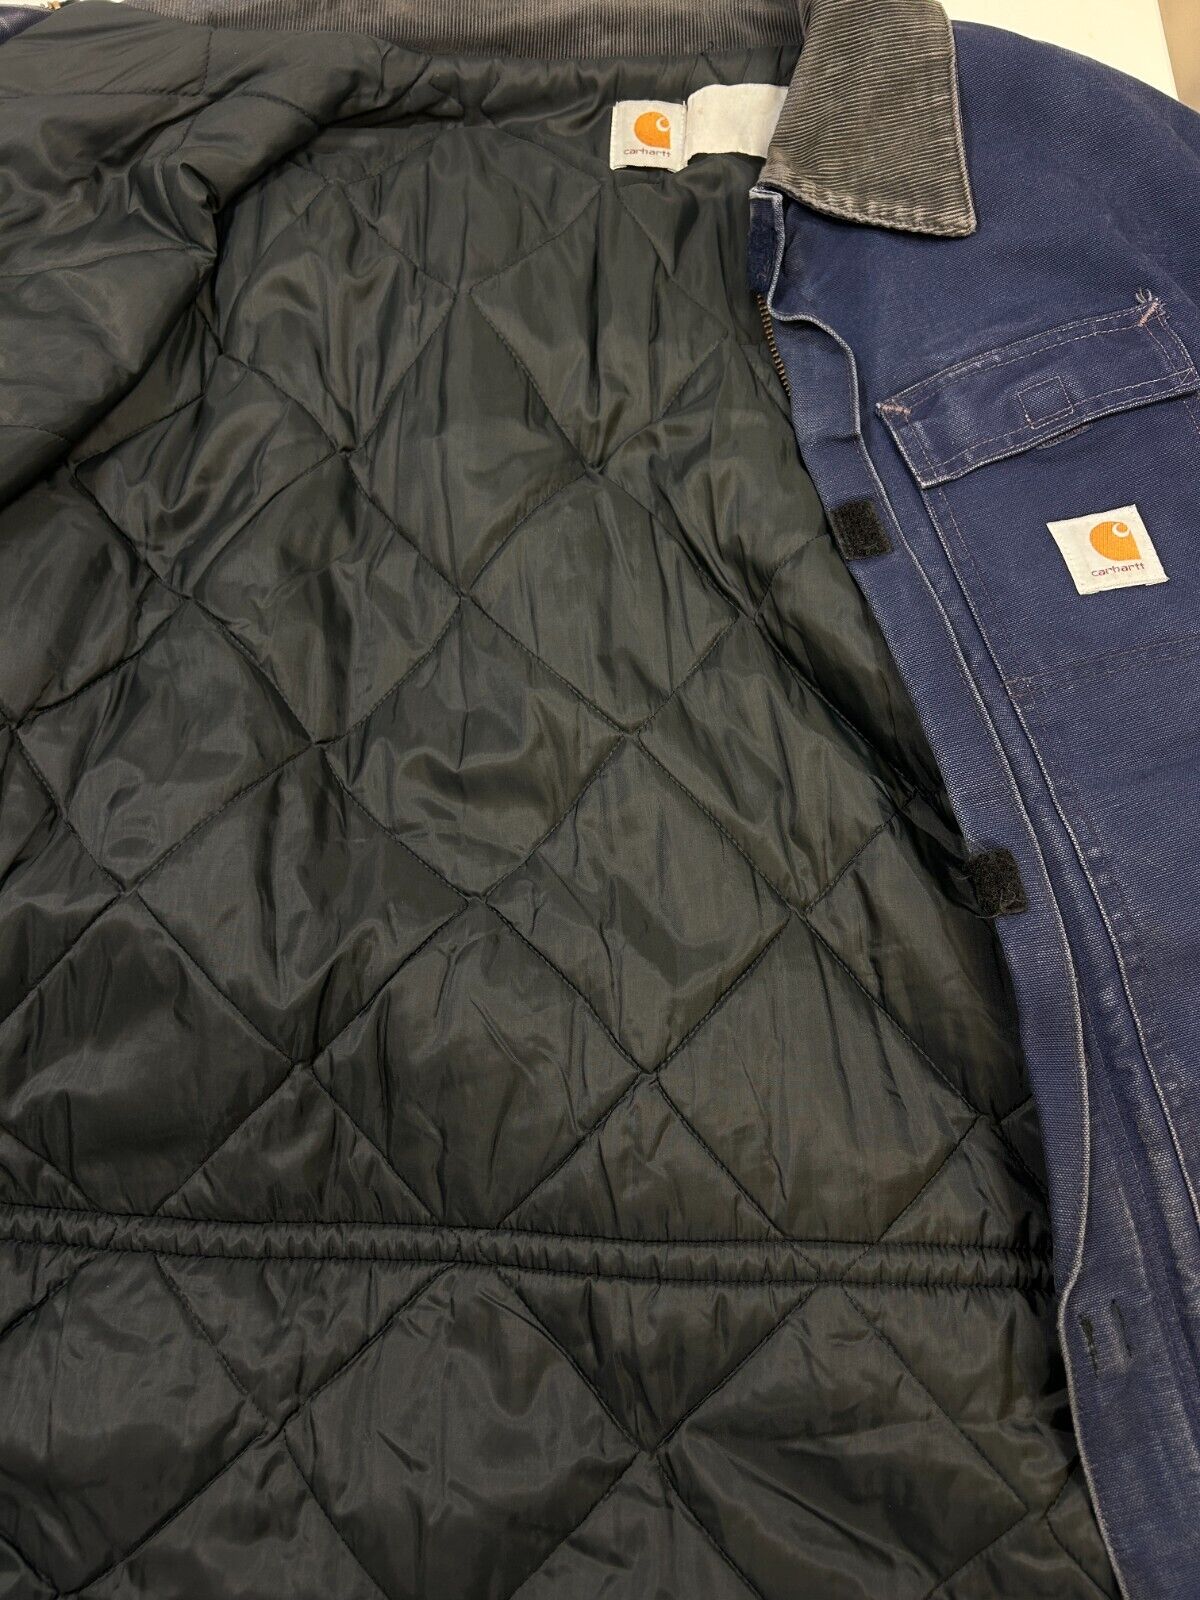 Vintage Carhartt Canvas Workwear Quilted Lined Arctic Coat Jacket Size 2XL